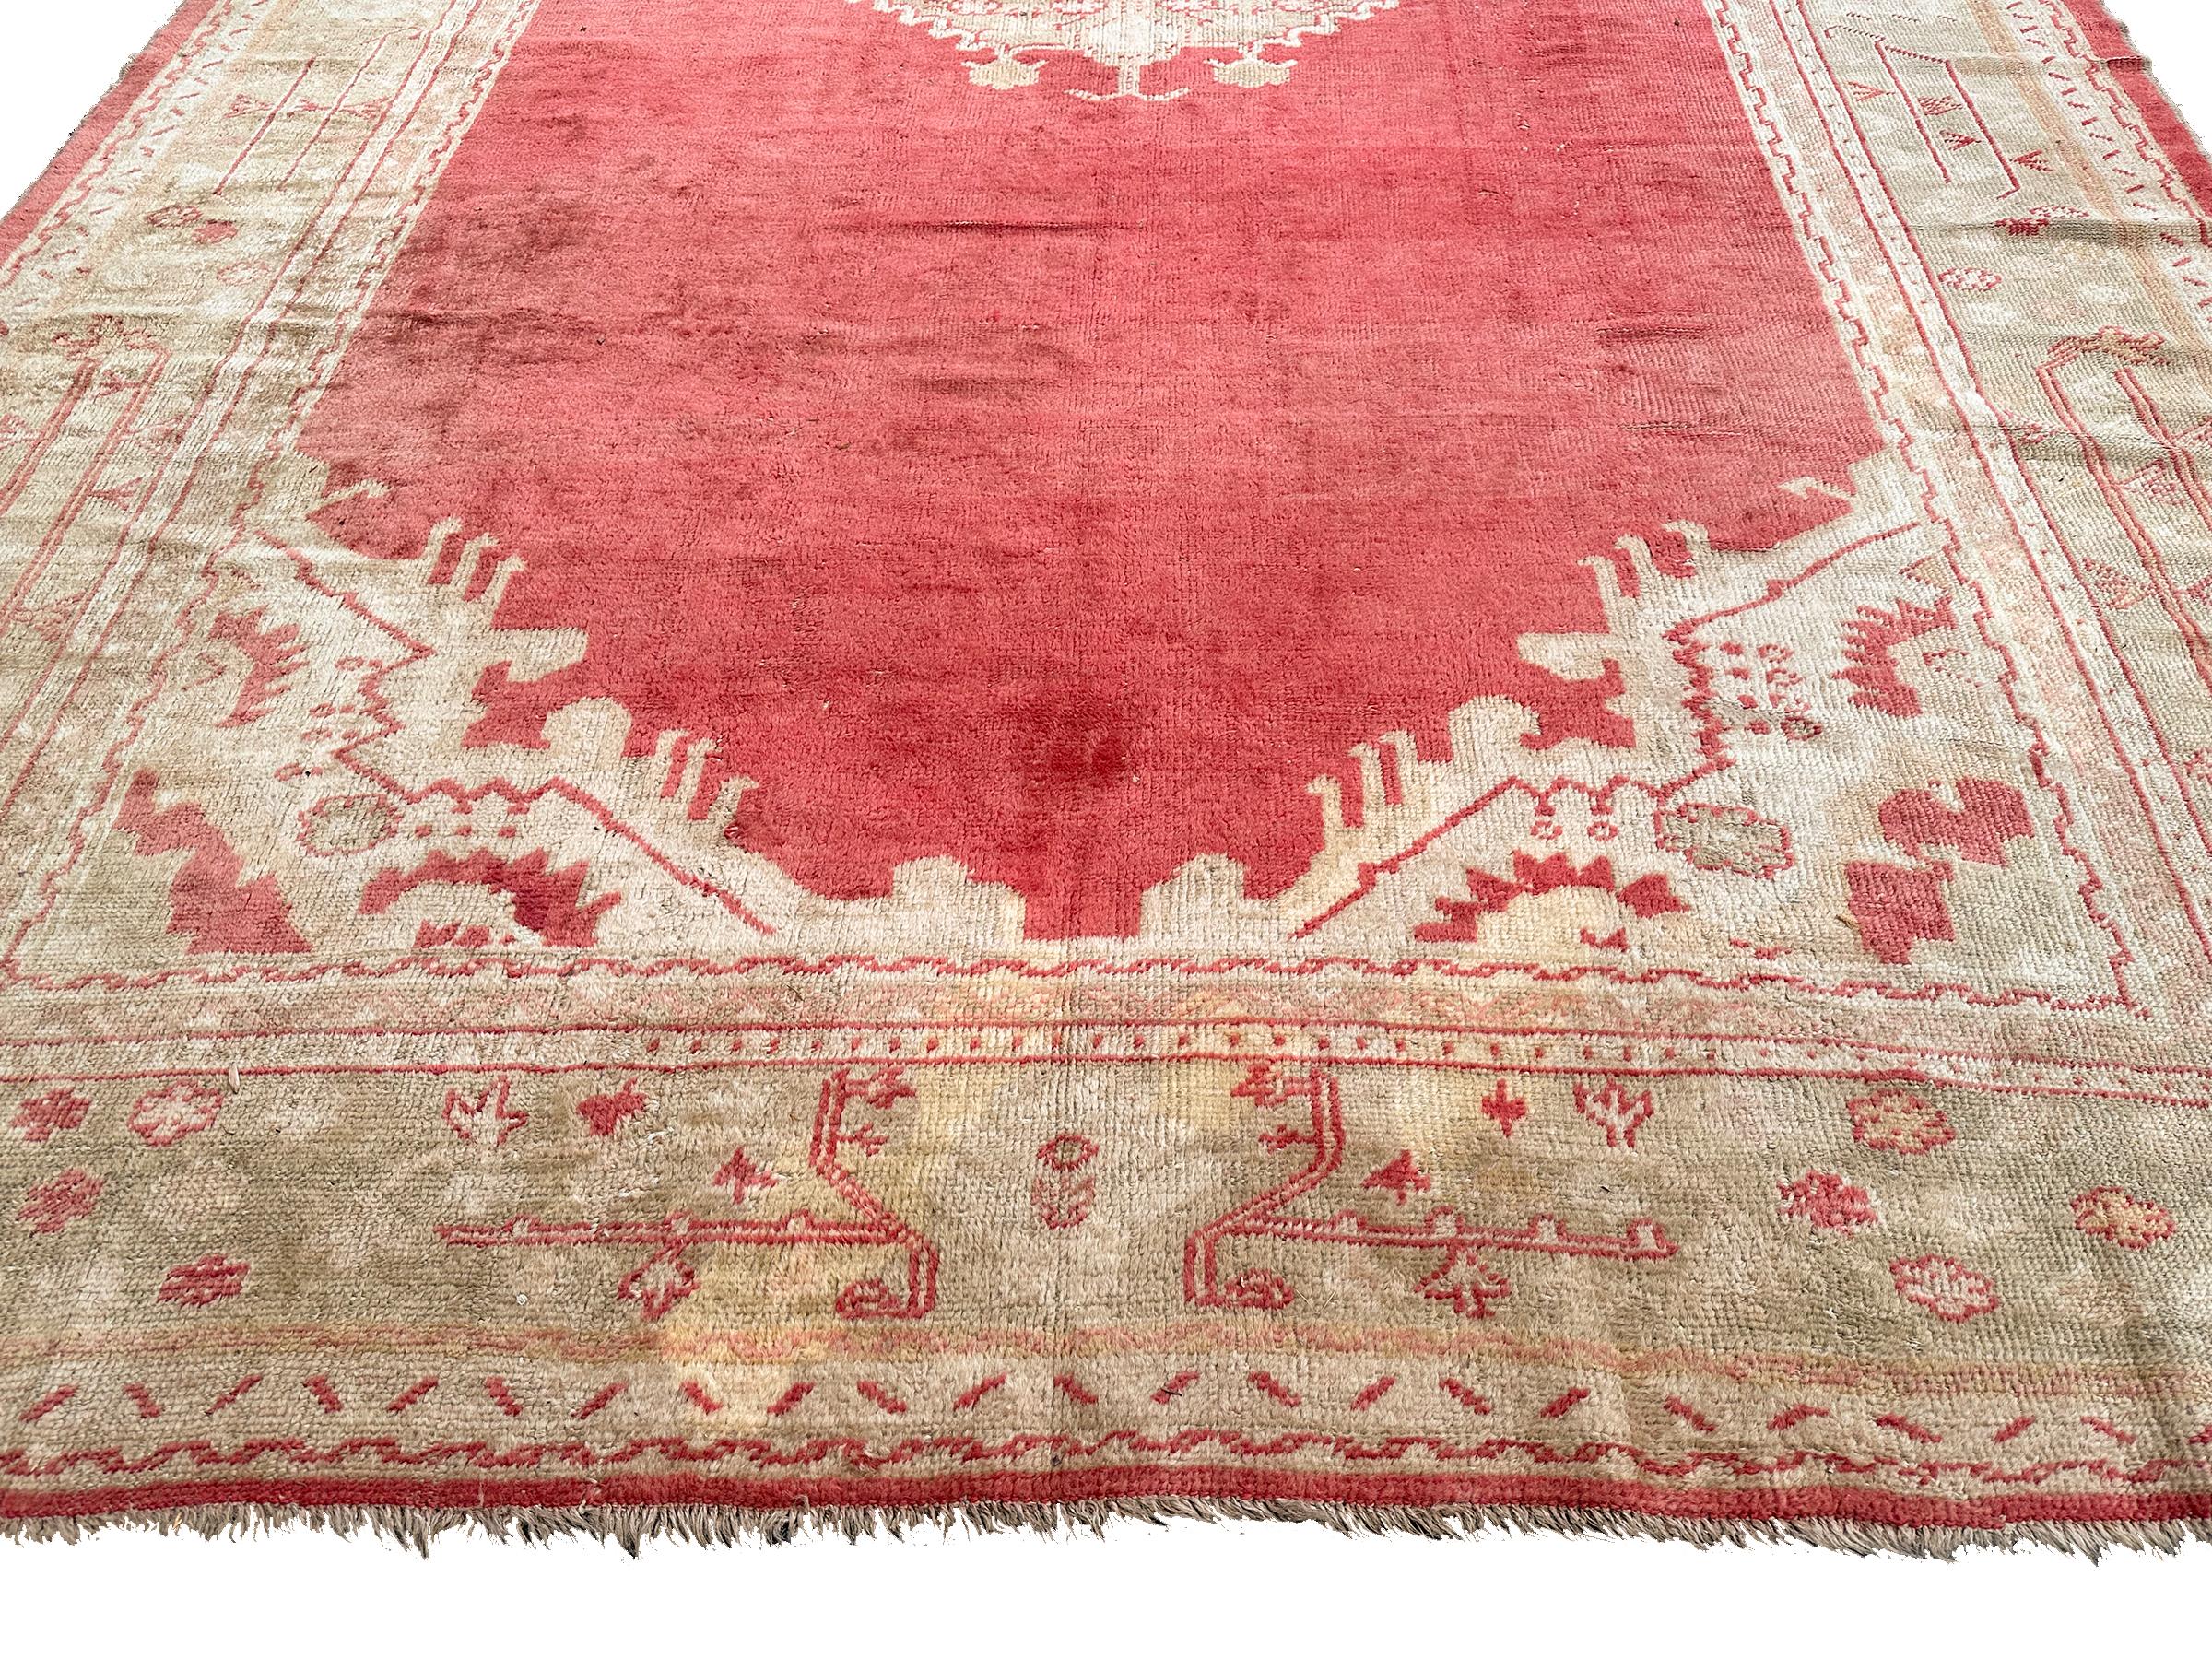 Authentic Antique Oushak Oversized Wool Foundation 1900 10x18 Handmade 305x549cm For Sale 2